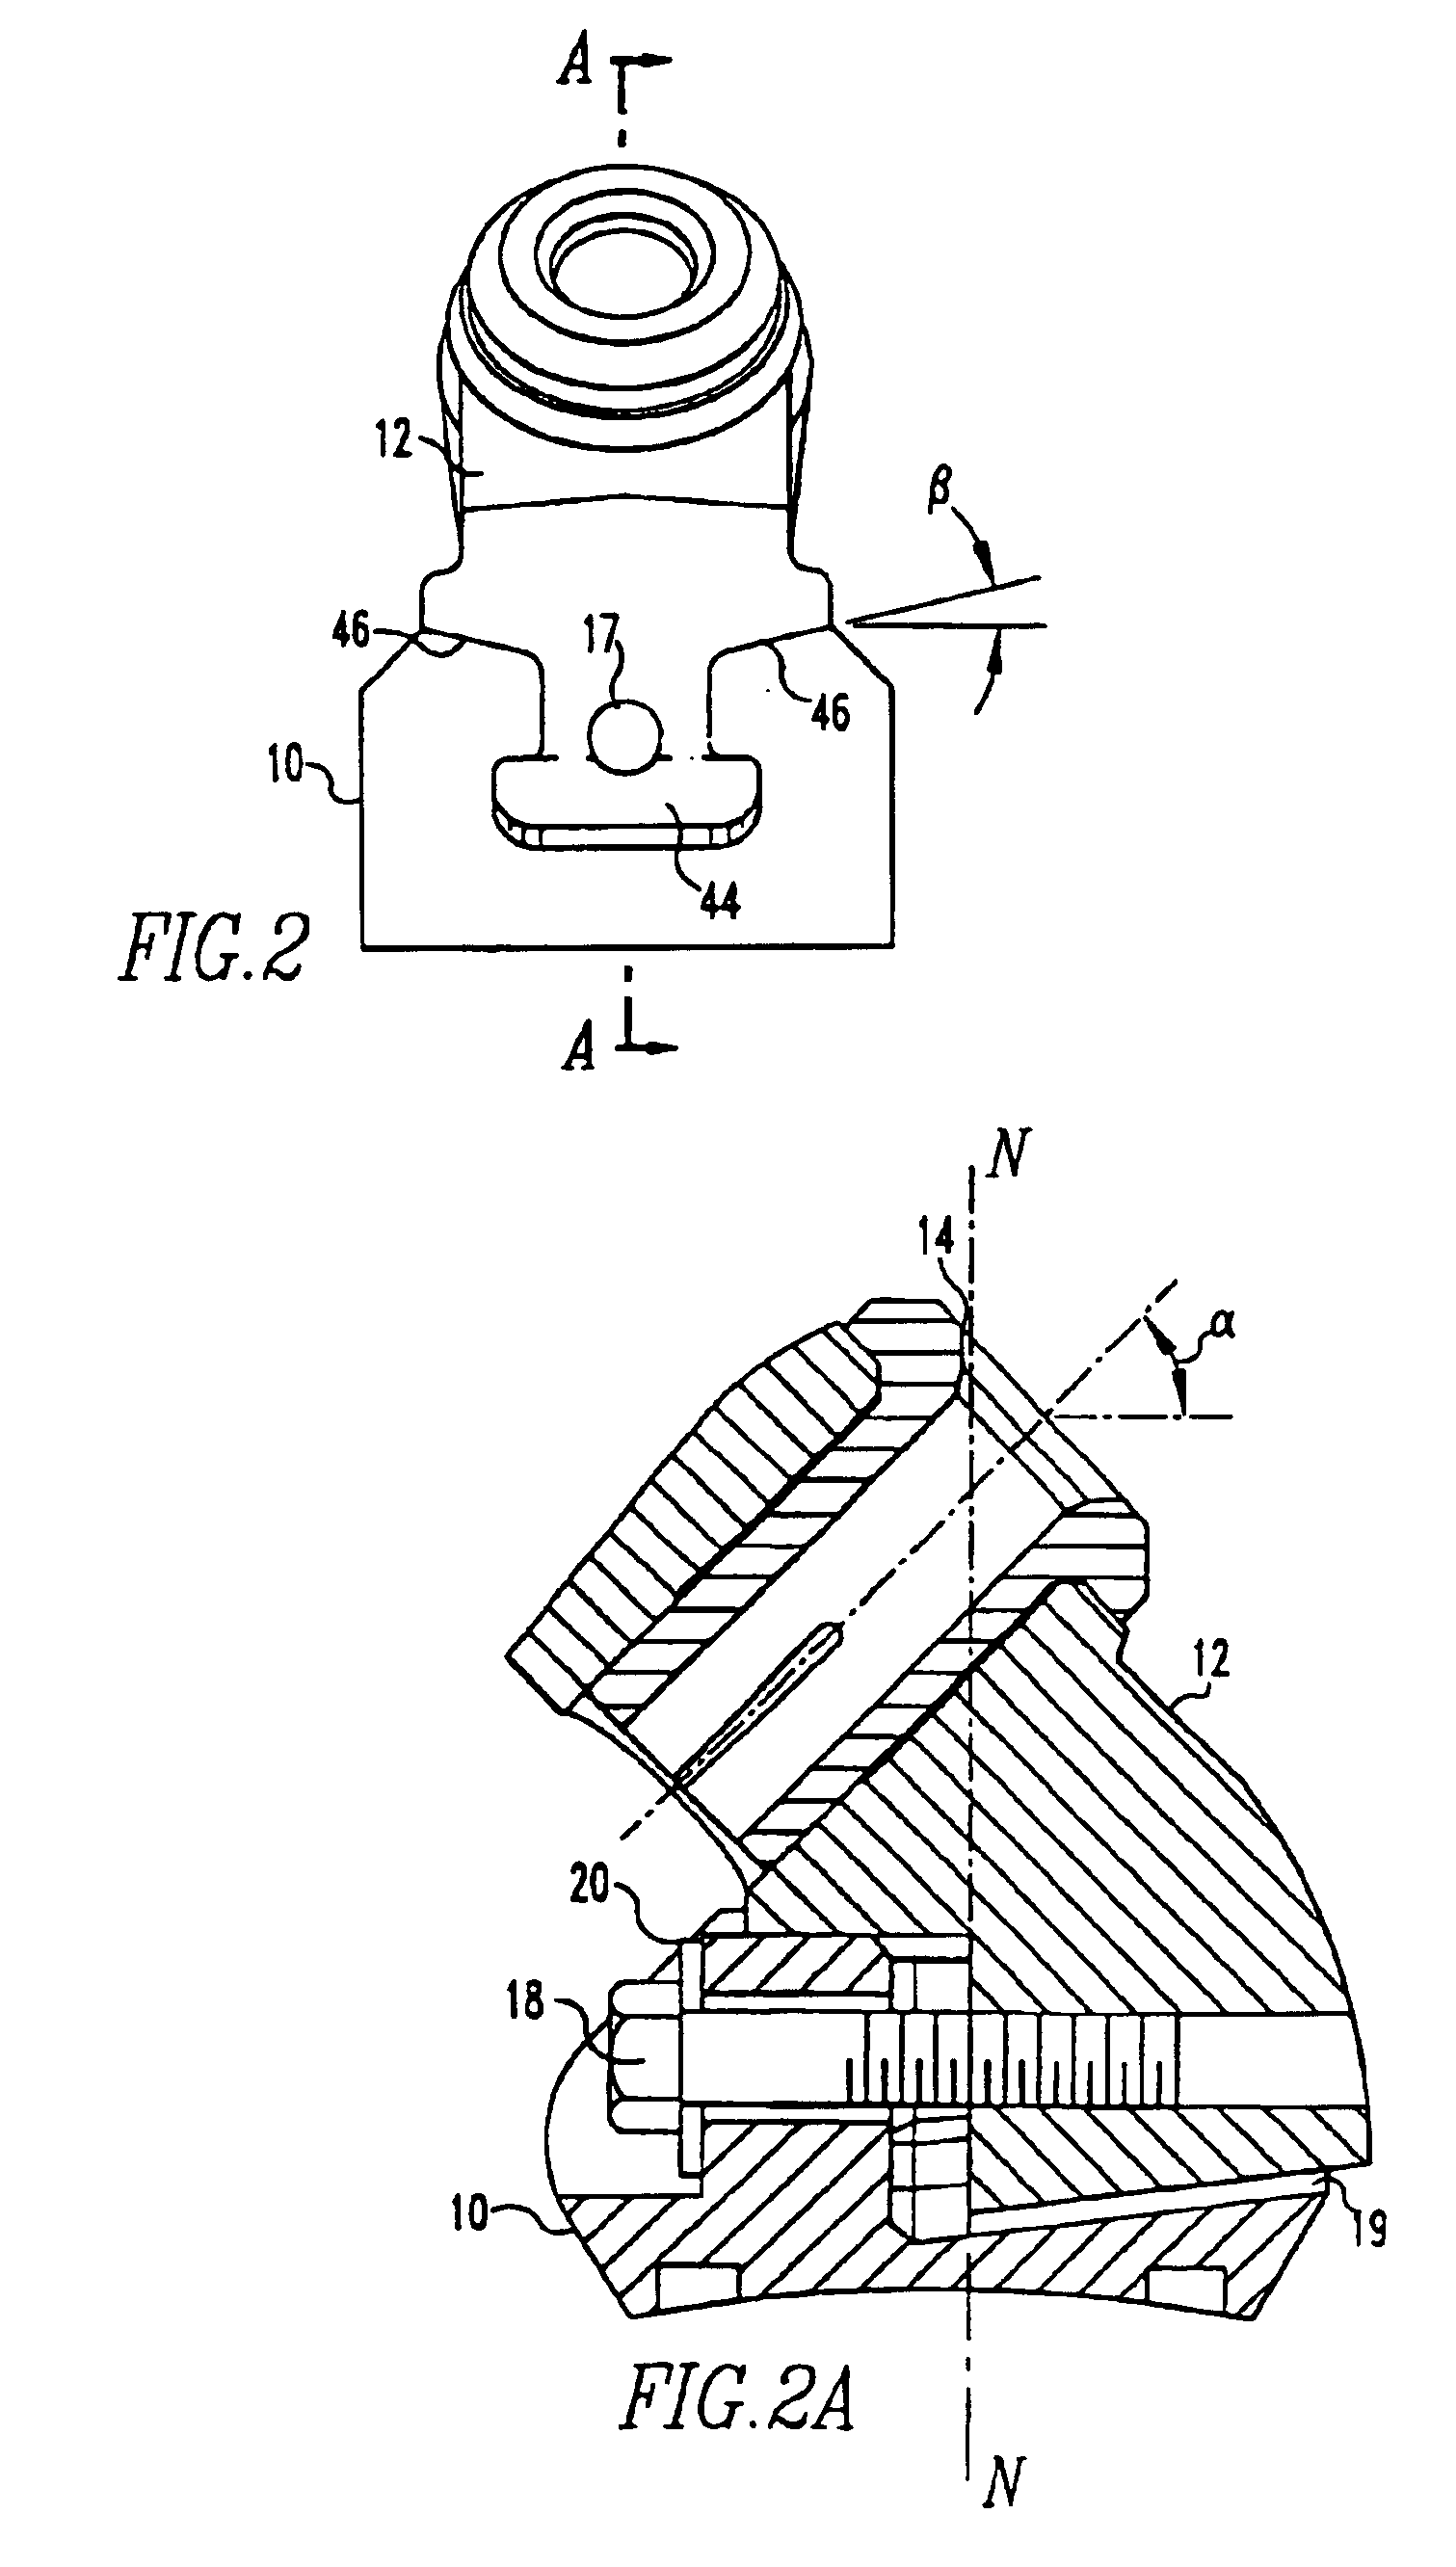 T-shaped cutter tool assembly with wear sleeve